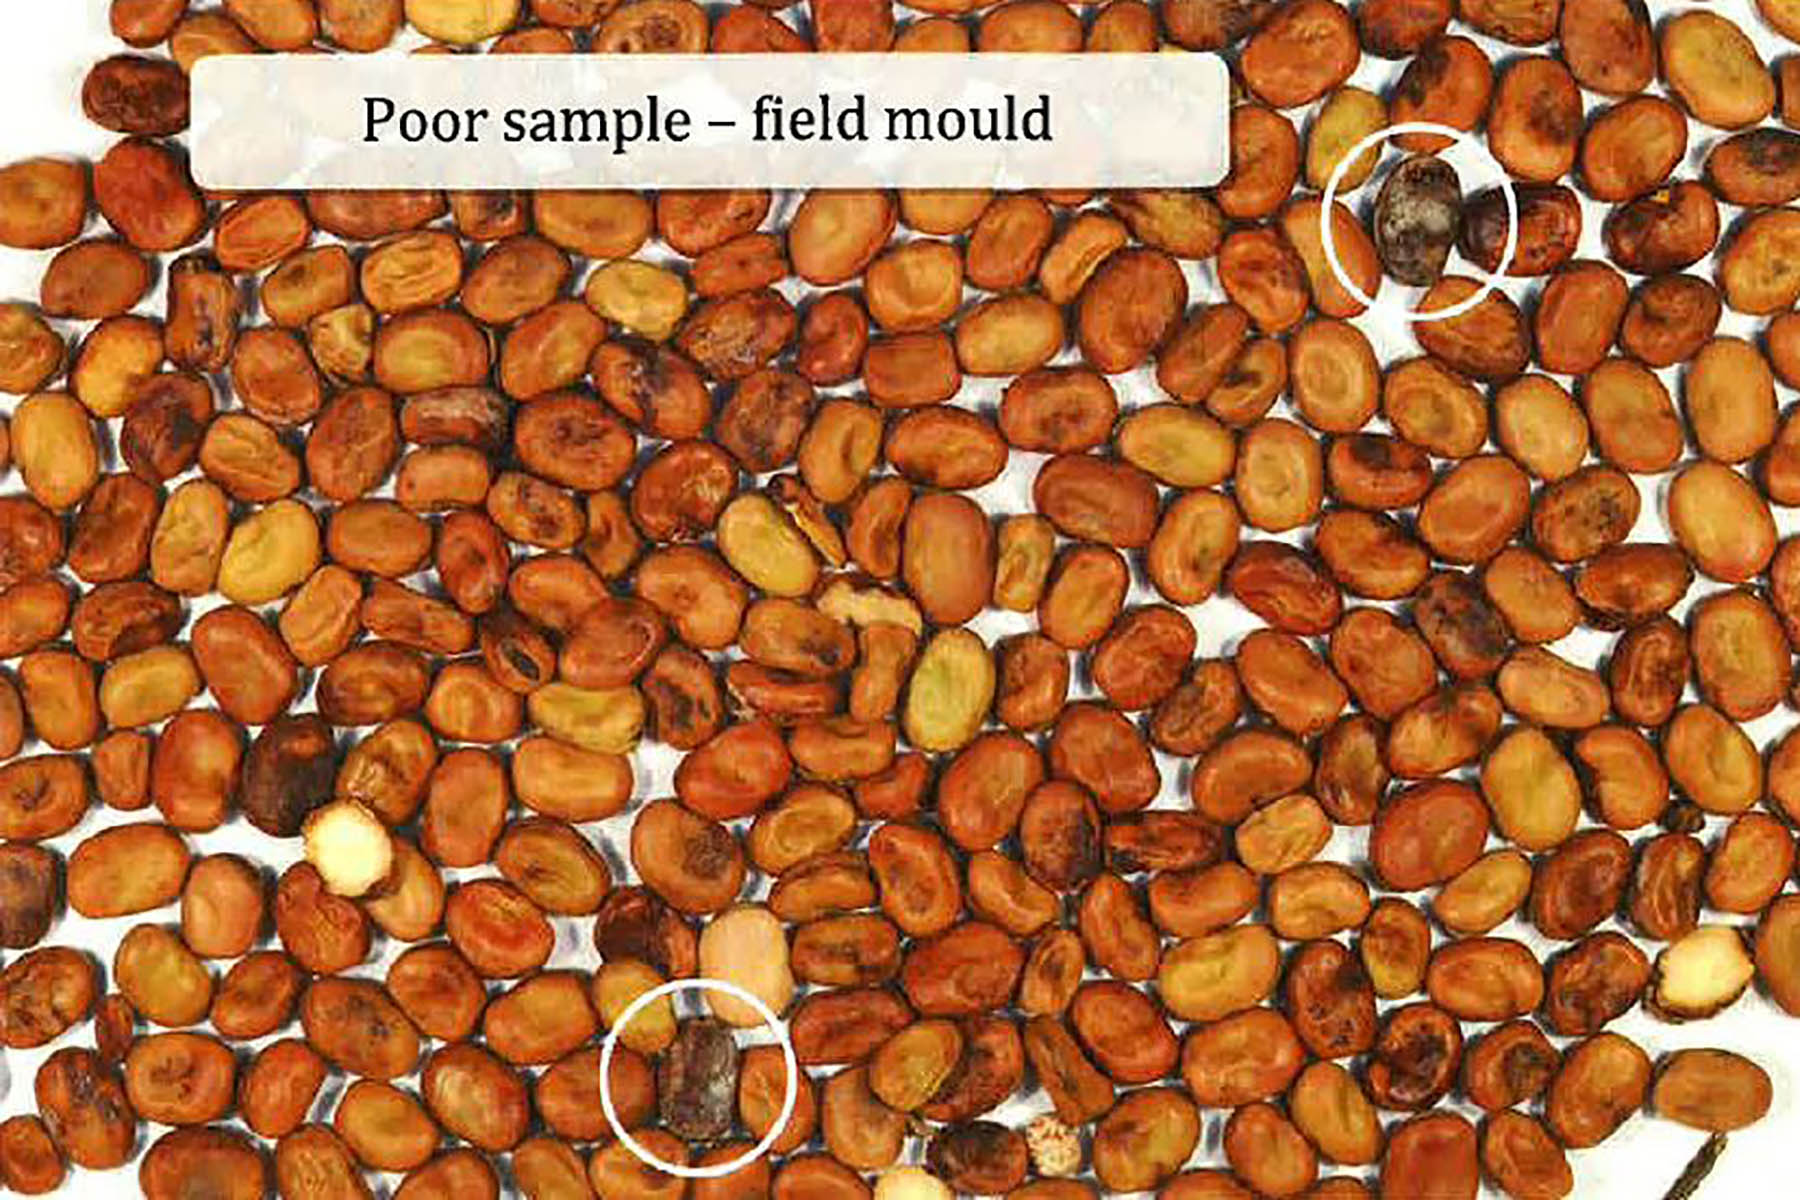 Mould of faba bean seed affecting seed quality and meeting export standards (S1203)